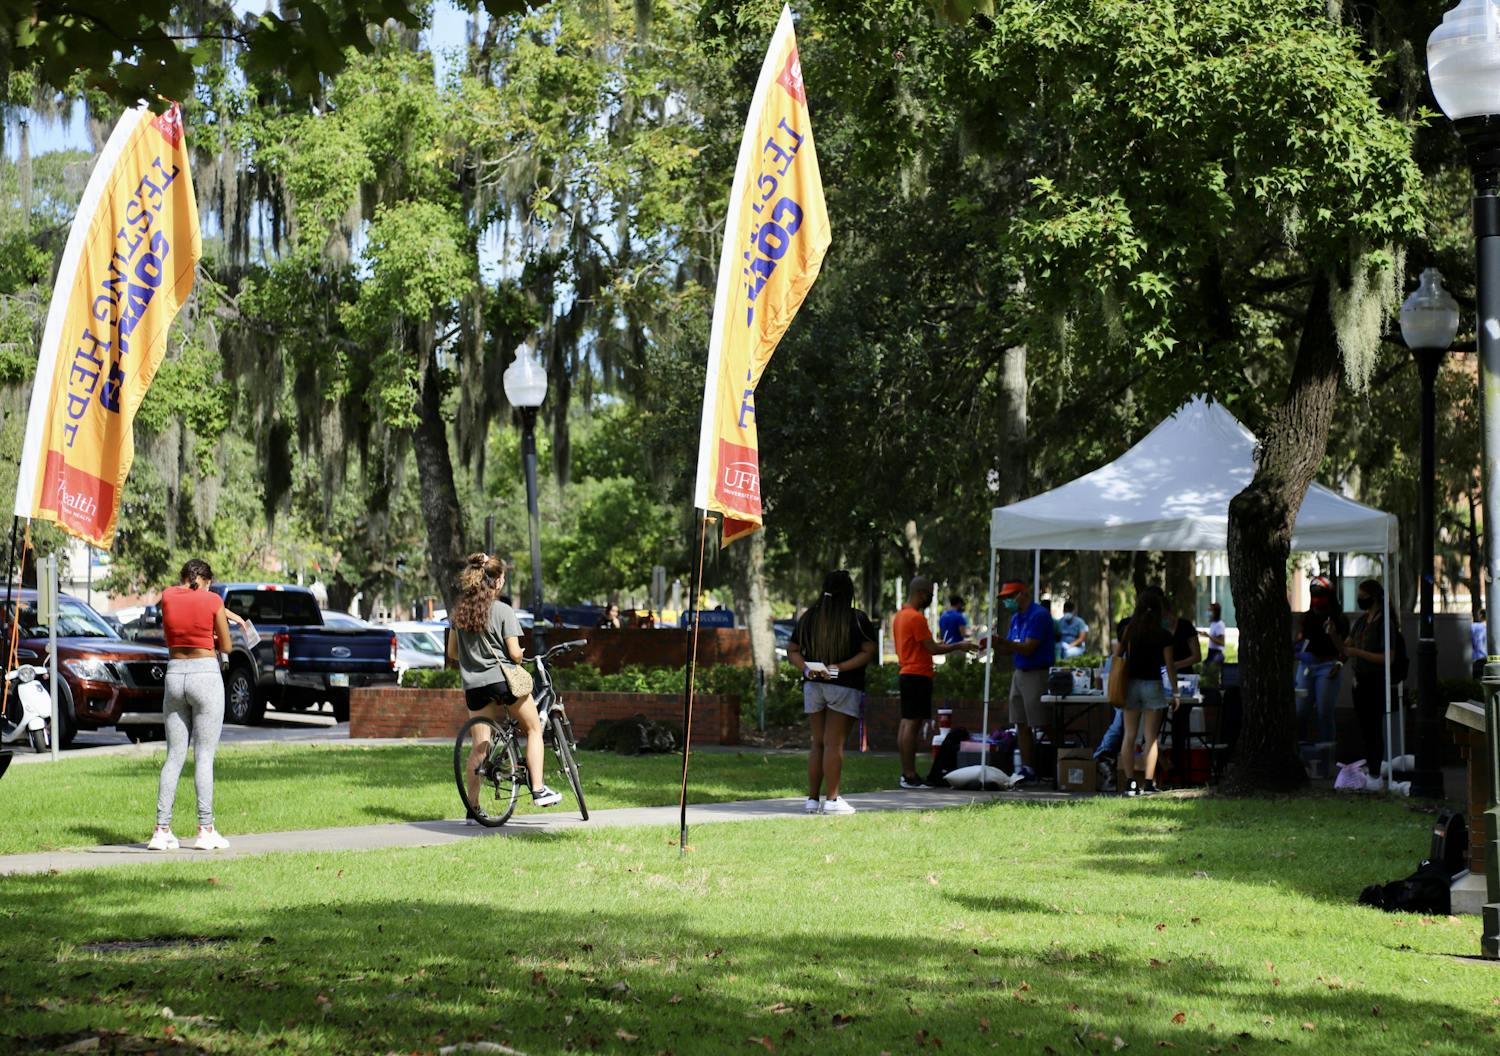 Students are seen waiting in line to be tested at the COVID-19 testing site outside of Murphee Hall on Sept. 24, 2020. Students who wish to get tested are required to fill out an online screening questionnare prior to making an appointment and are asked to bring their Gator One ID card.